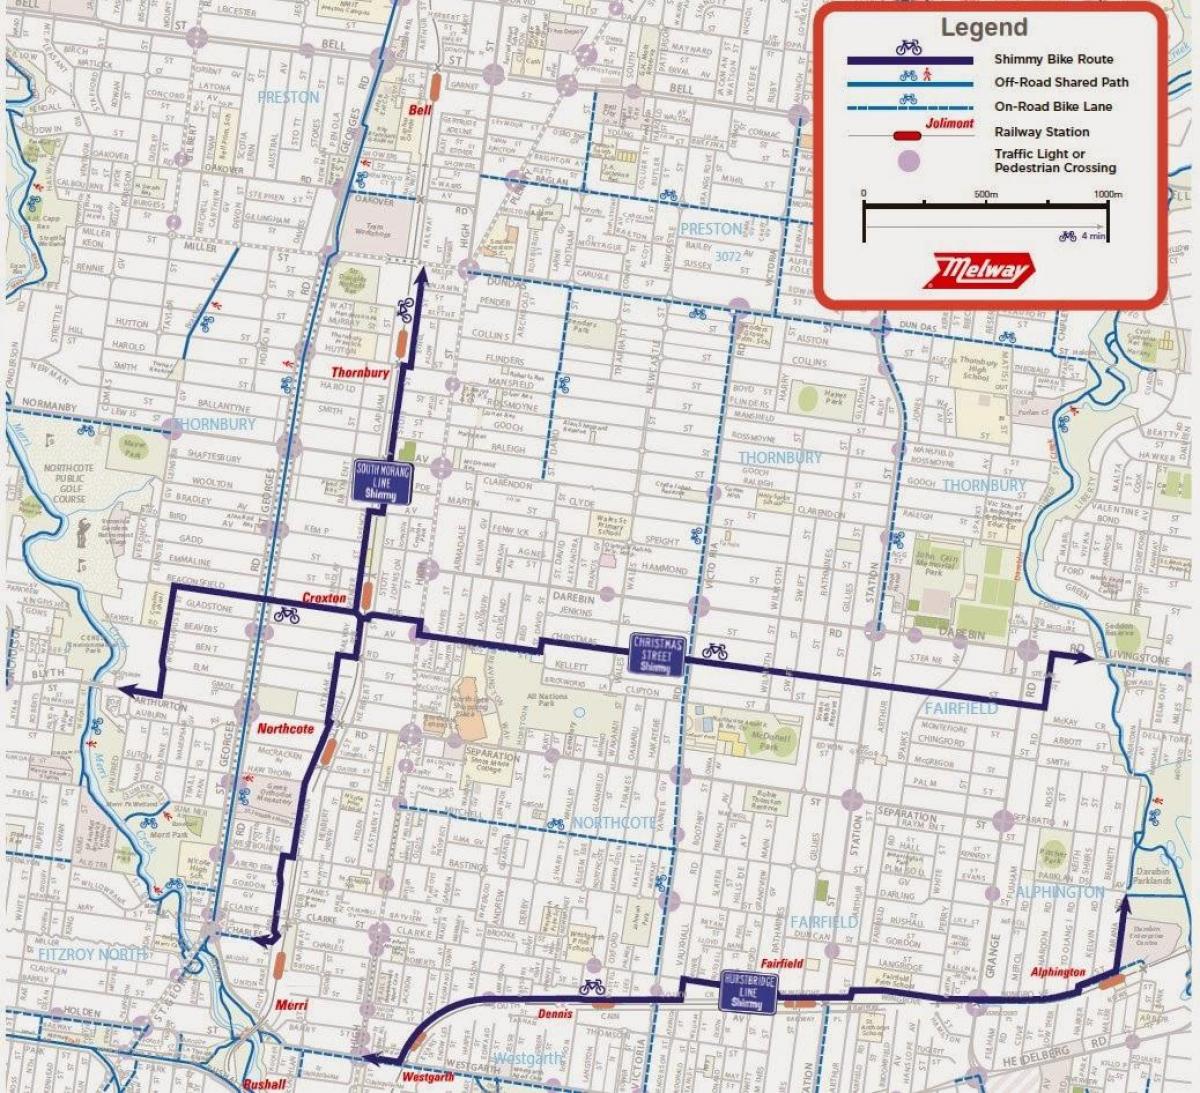 map of Melbourne bike share